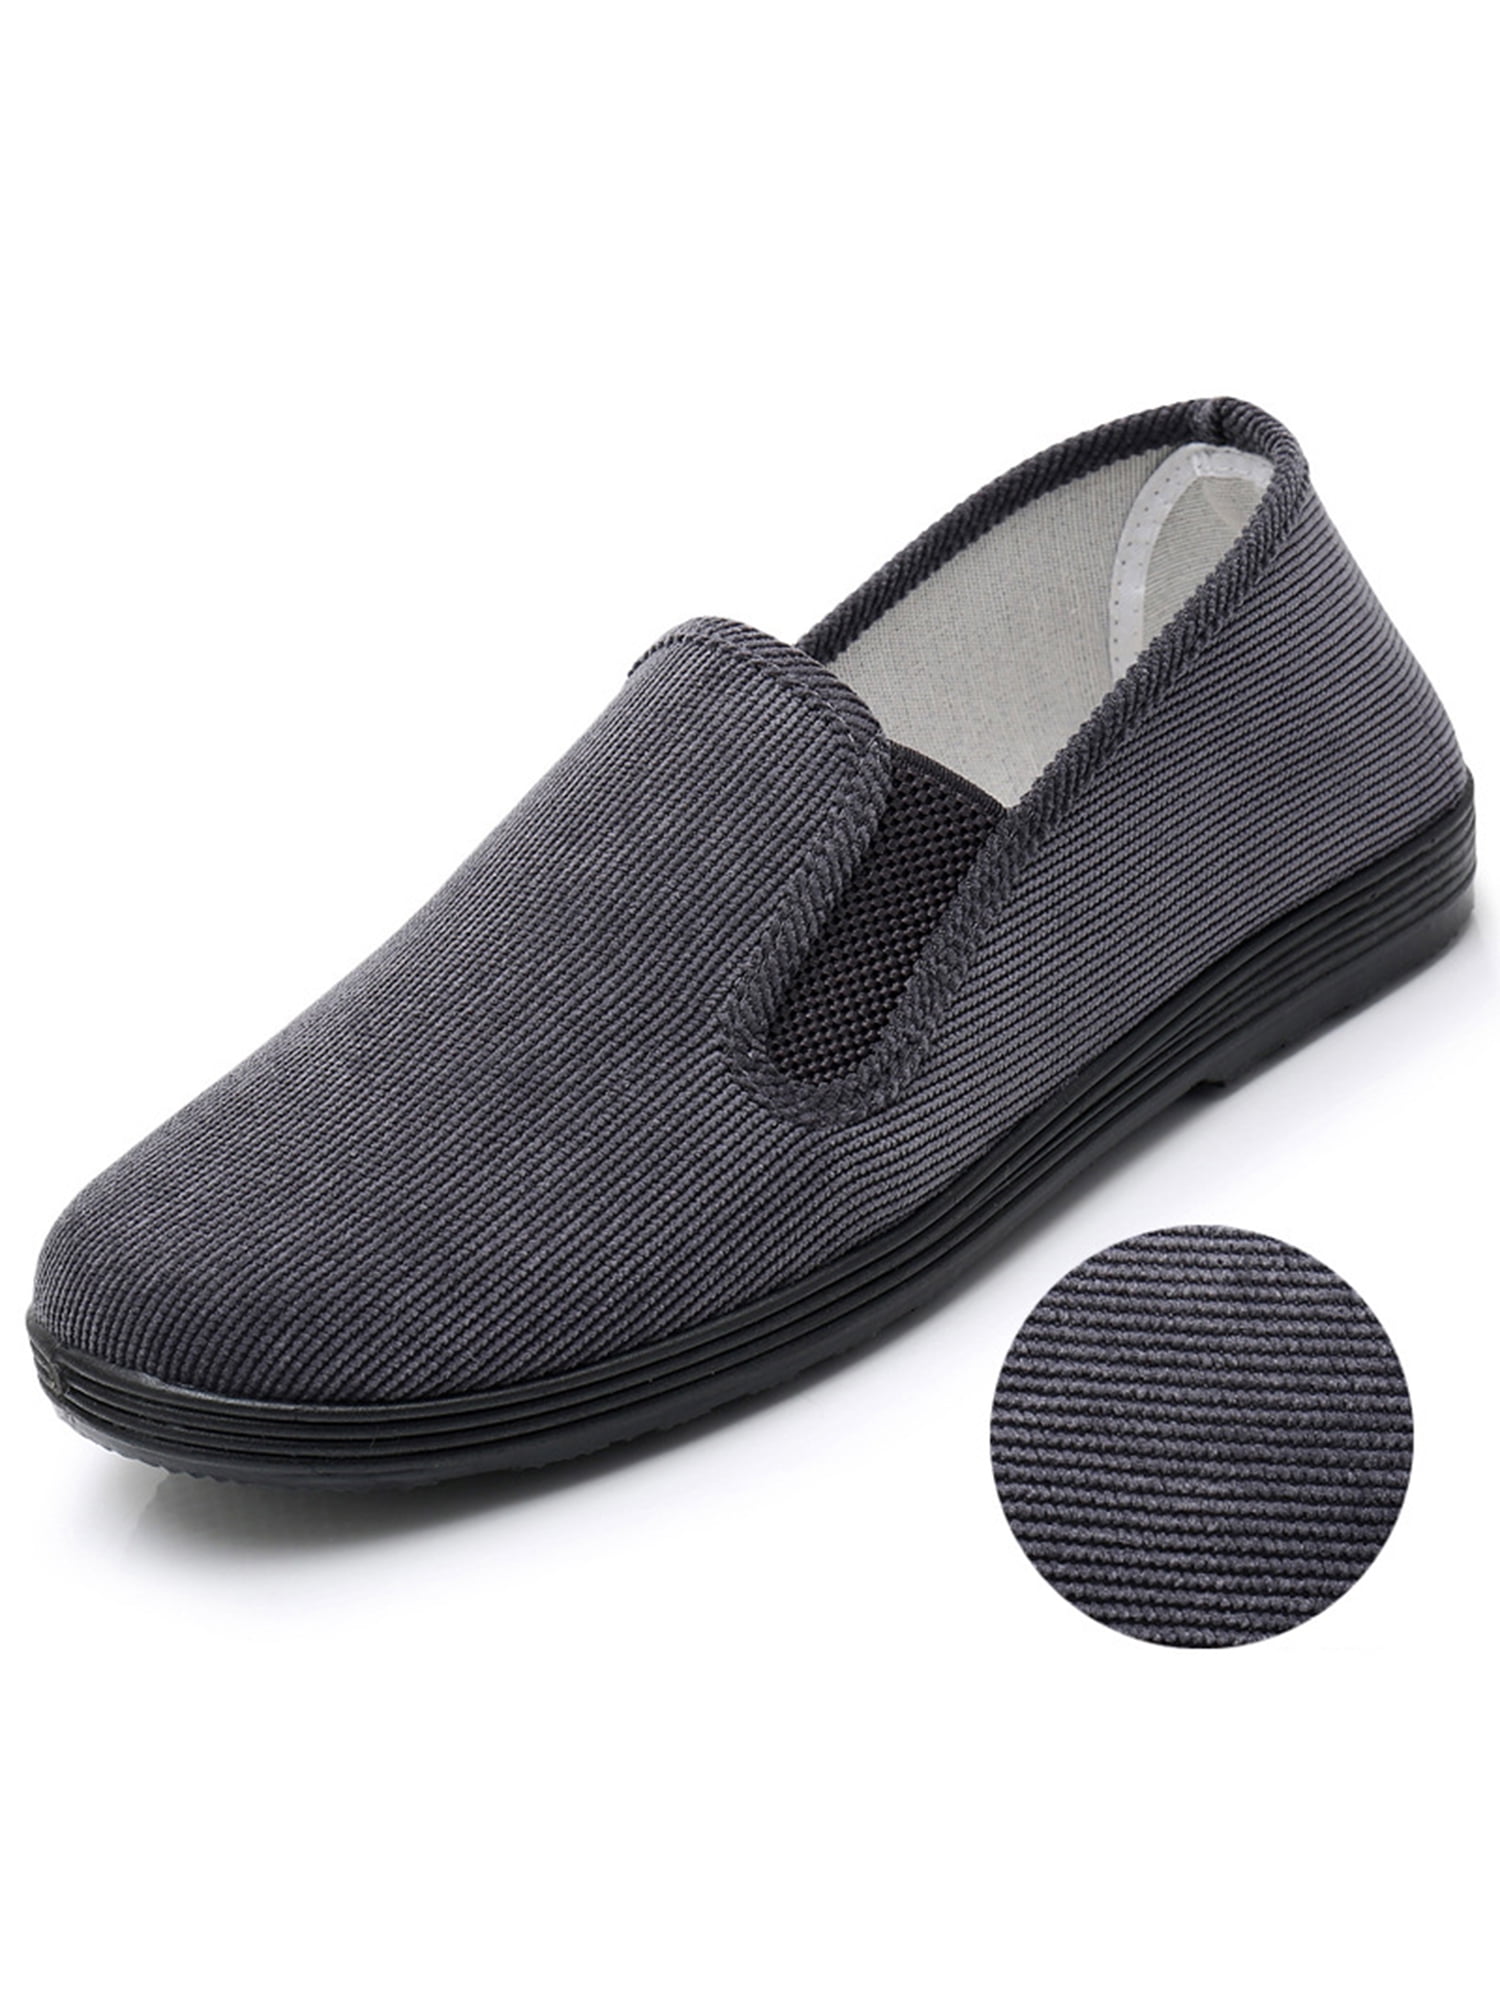 New Boys Mens Slip On Casual Boat Deck Moccasin Designer Loafers Driving Shoes 